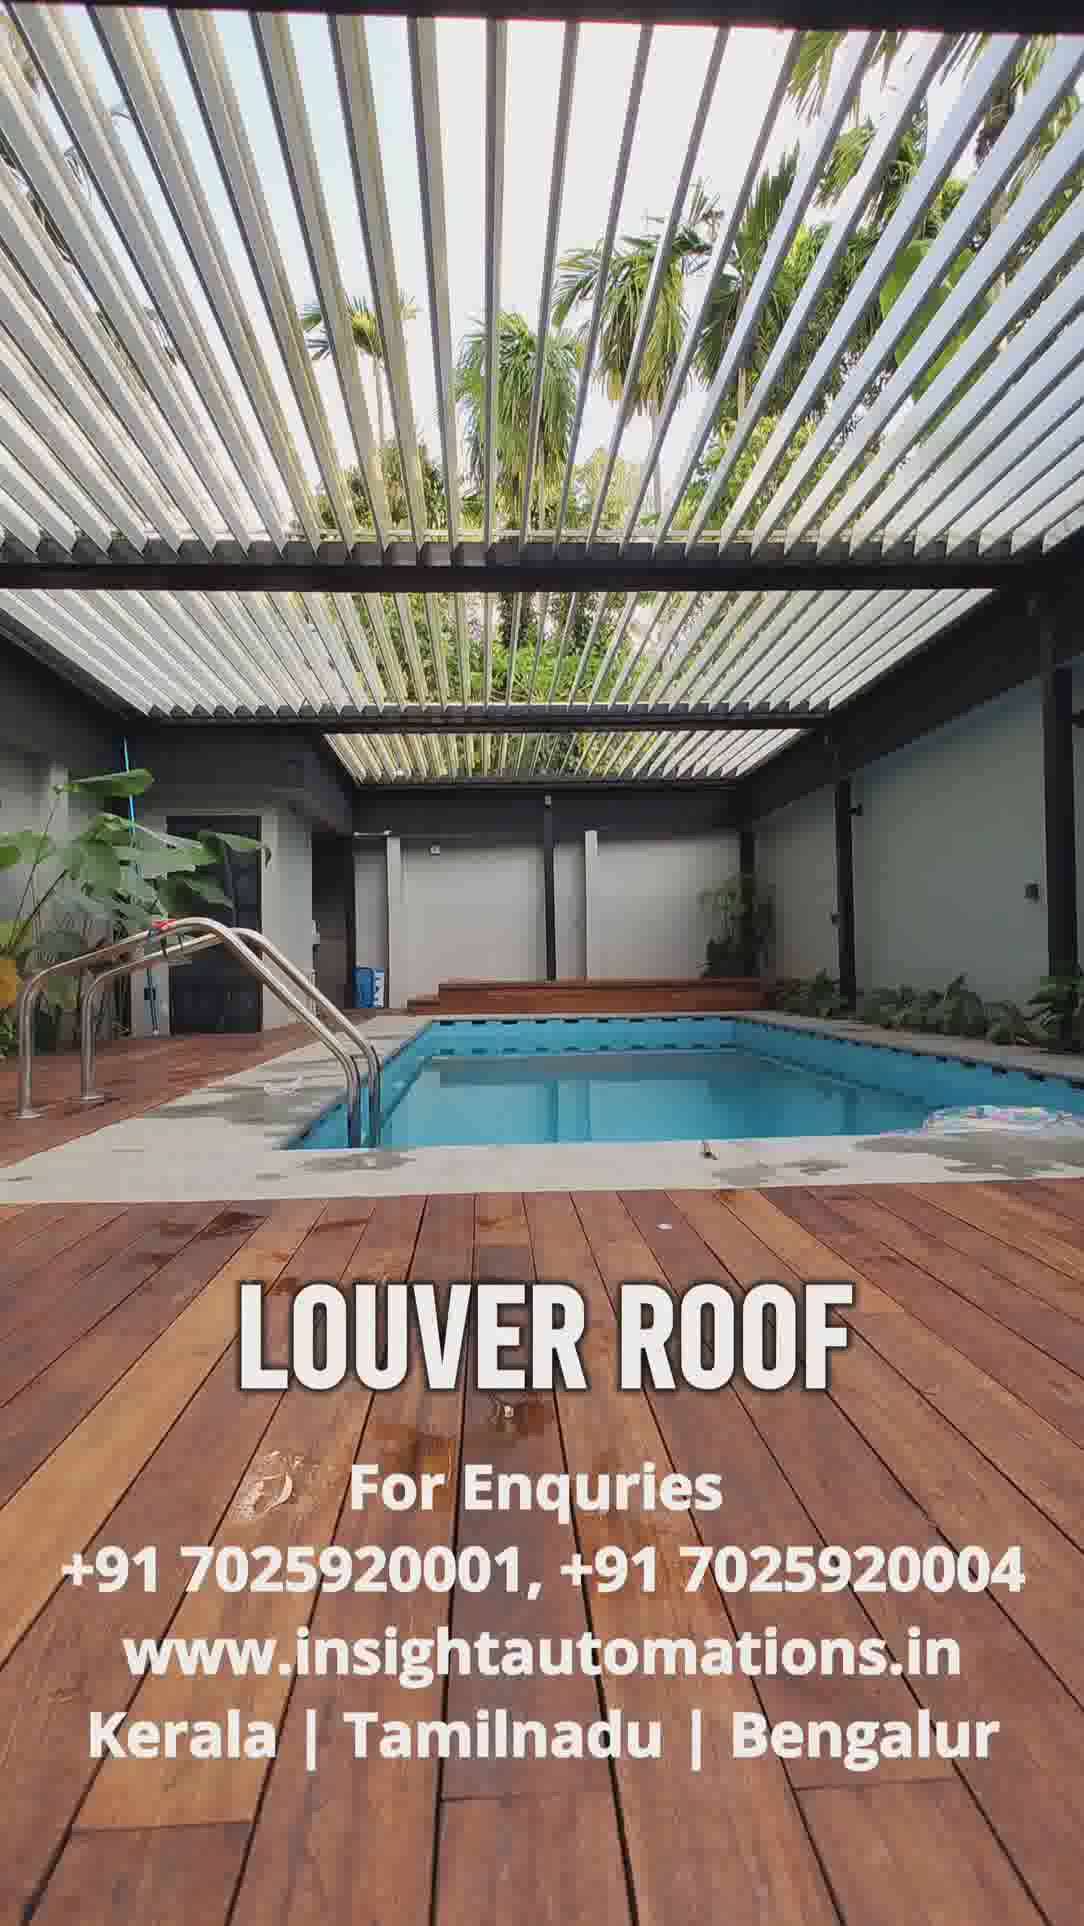 louverd smart roof in kerala
#smartroof 
#automaticroofing